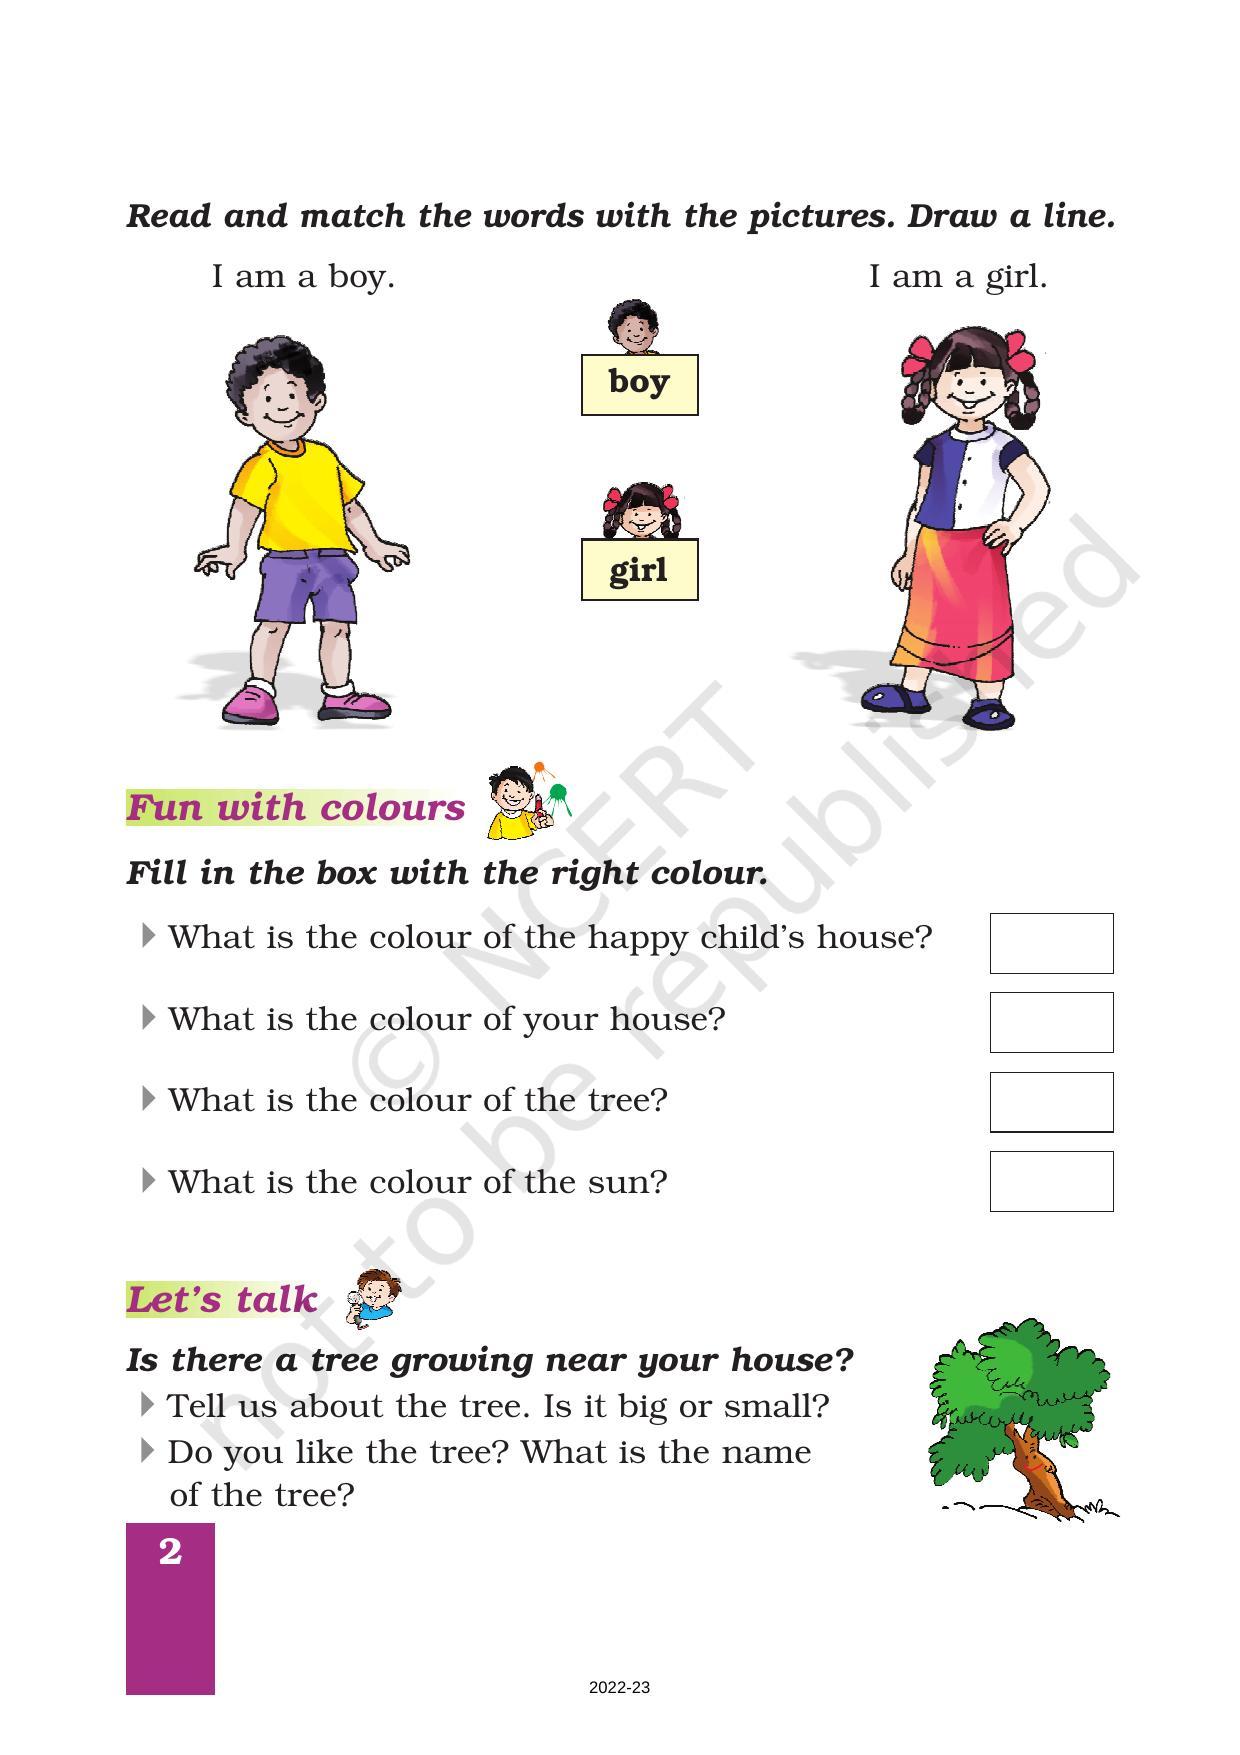 NCERT Book for Class 1 English (Marigold):Unit 1Poem-A Happy Child - Page 2